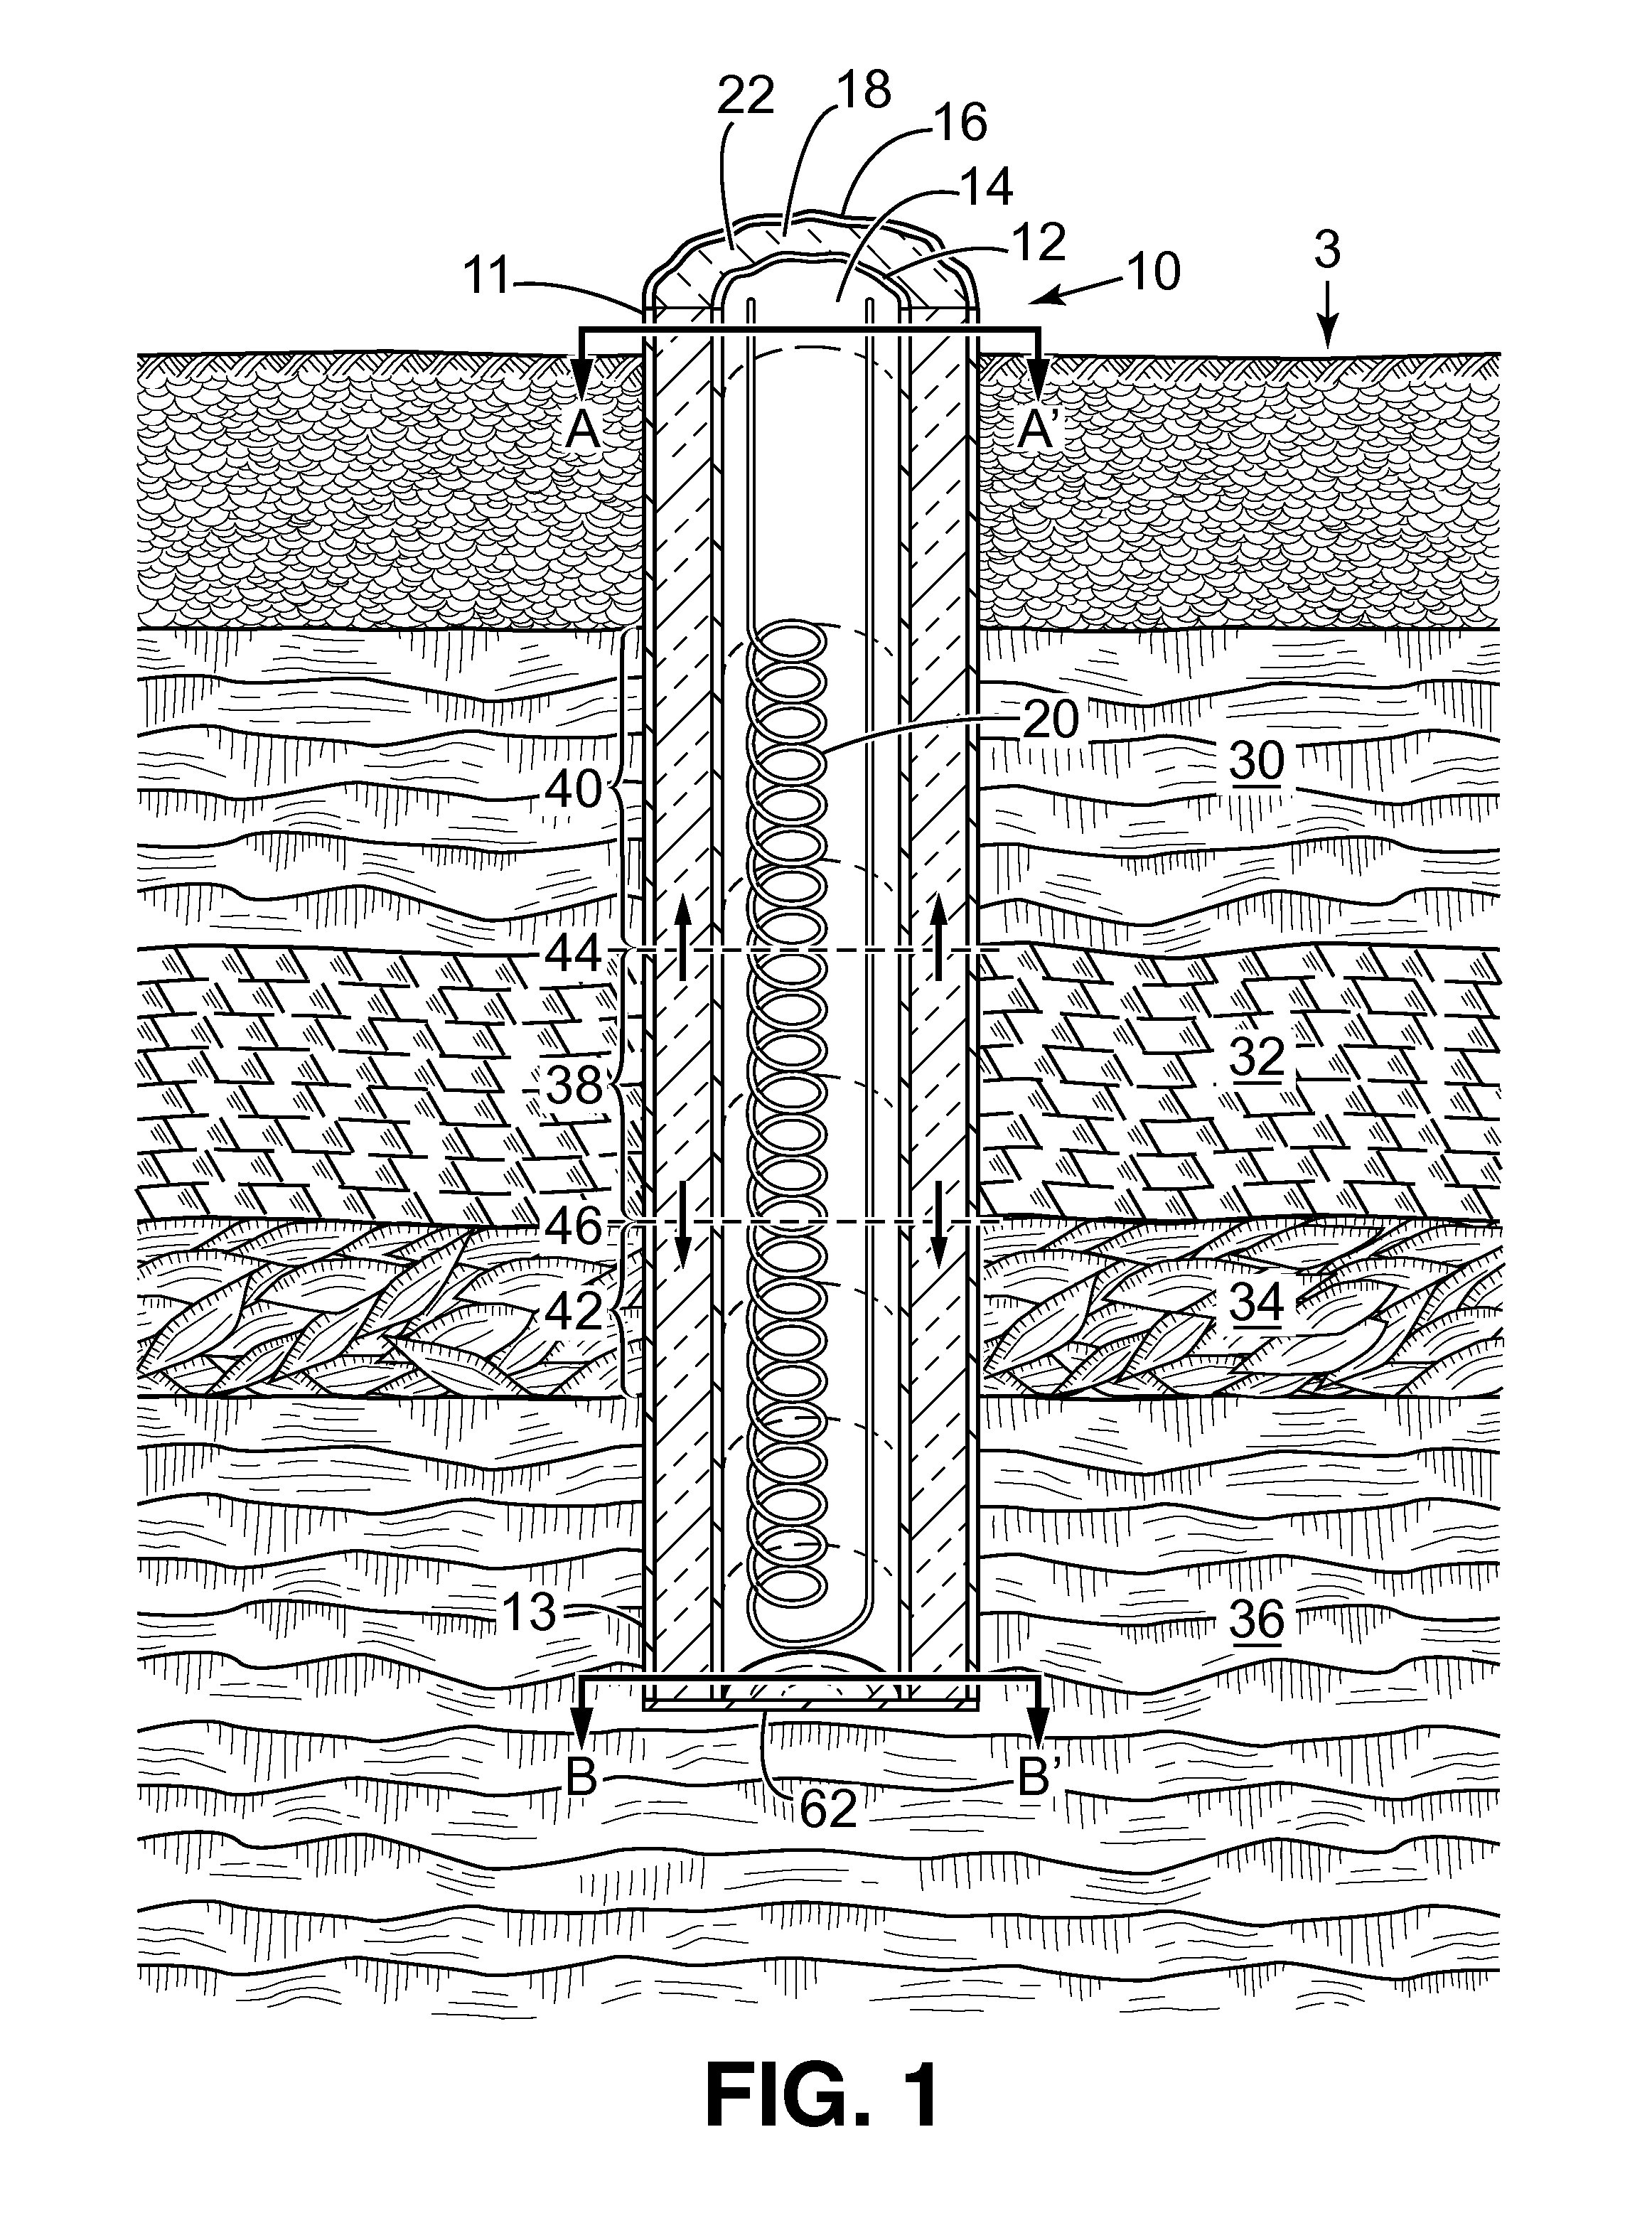 Liquid Metal Heat Exchanger for Efficient Heating of Soils and Geologic Formations